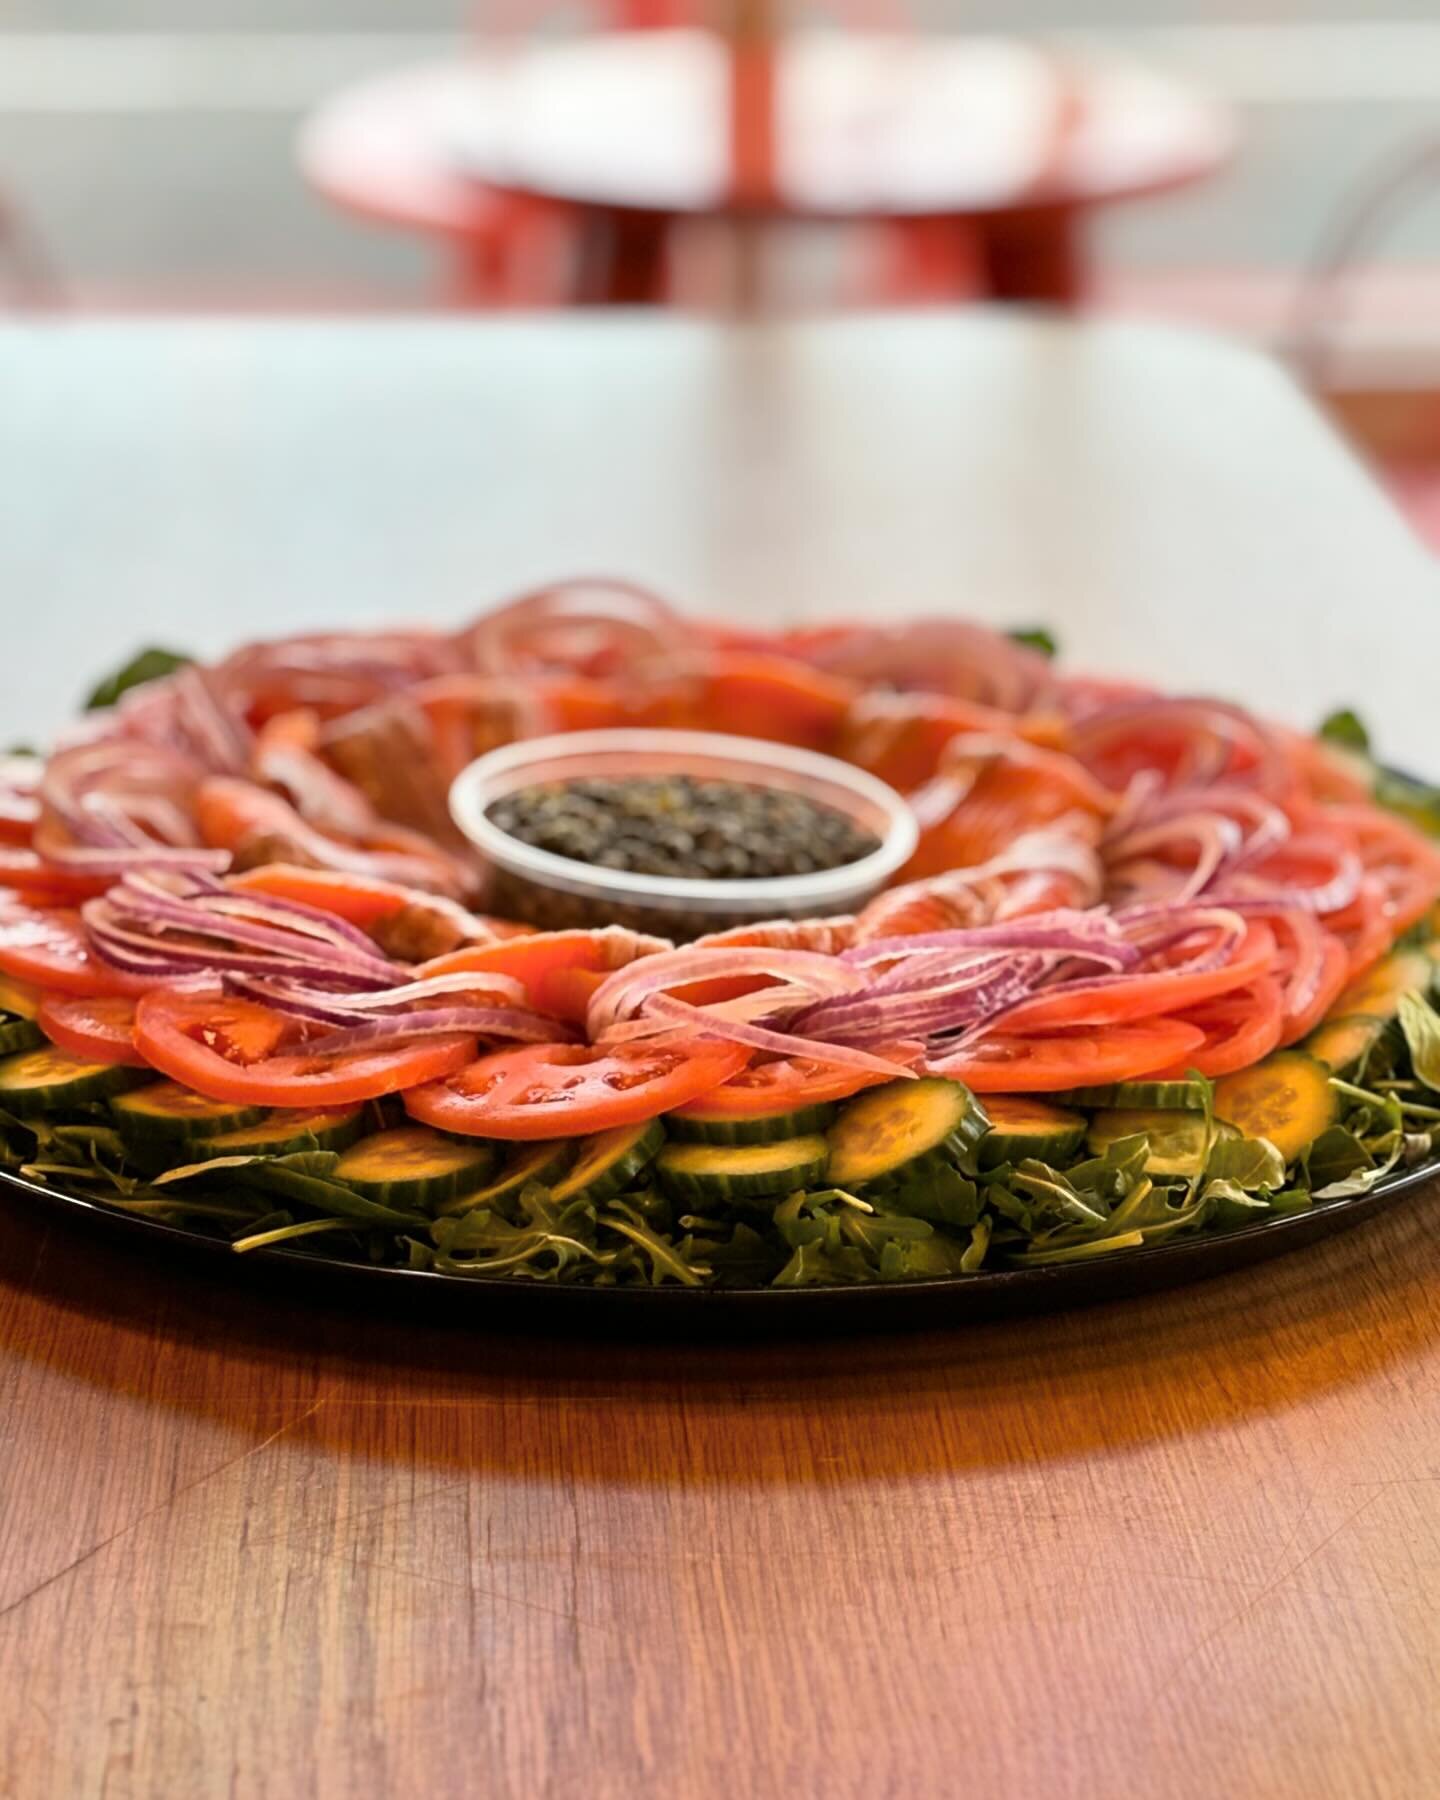 A Lox Tray in the glow of morning ignites the appetite. 

More information ➡️ www.natesbagelsrva.com/catering 

#lox #loxwiththeworks #catering #brunch #bagel #bagels